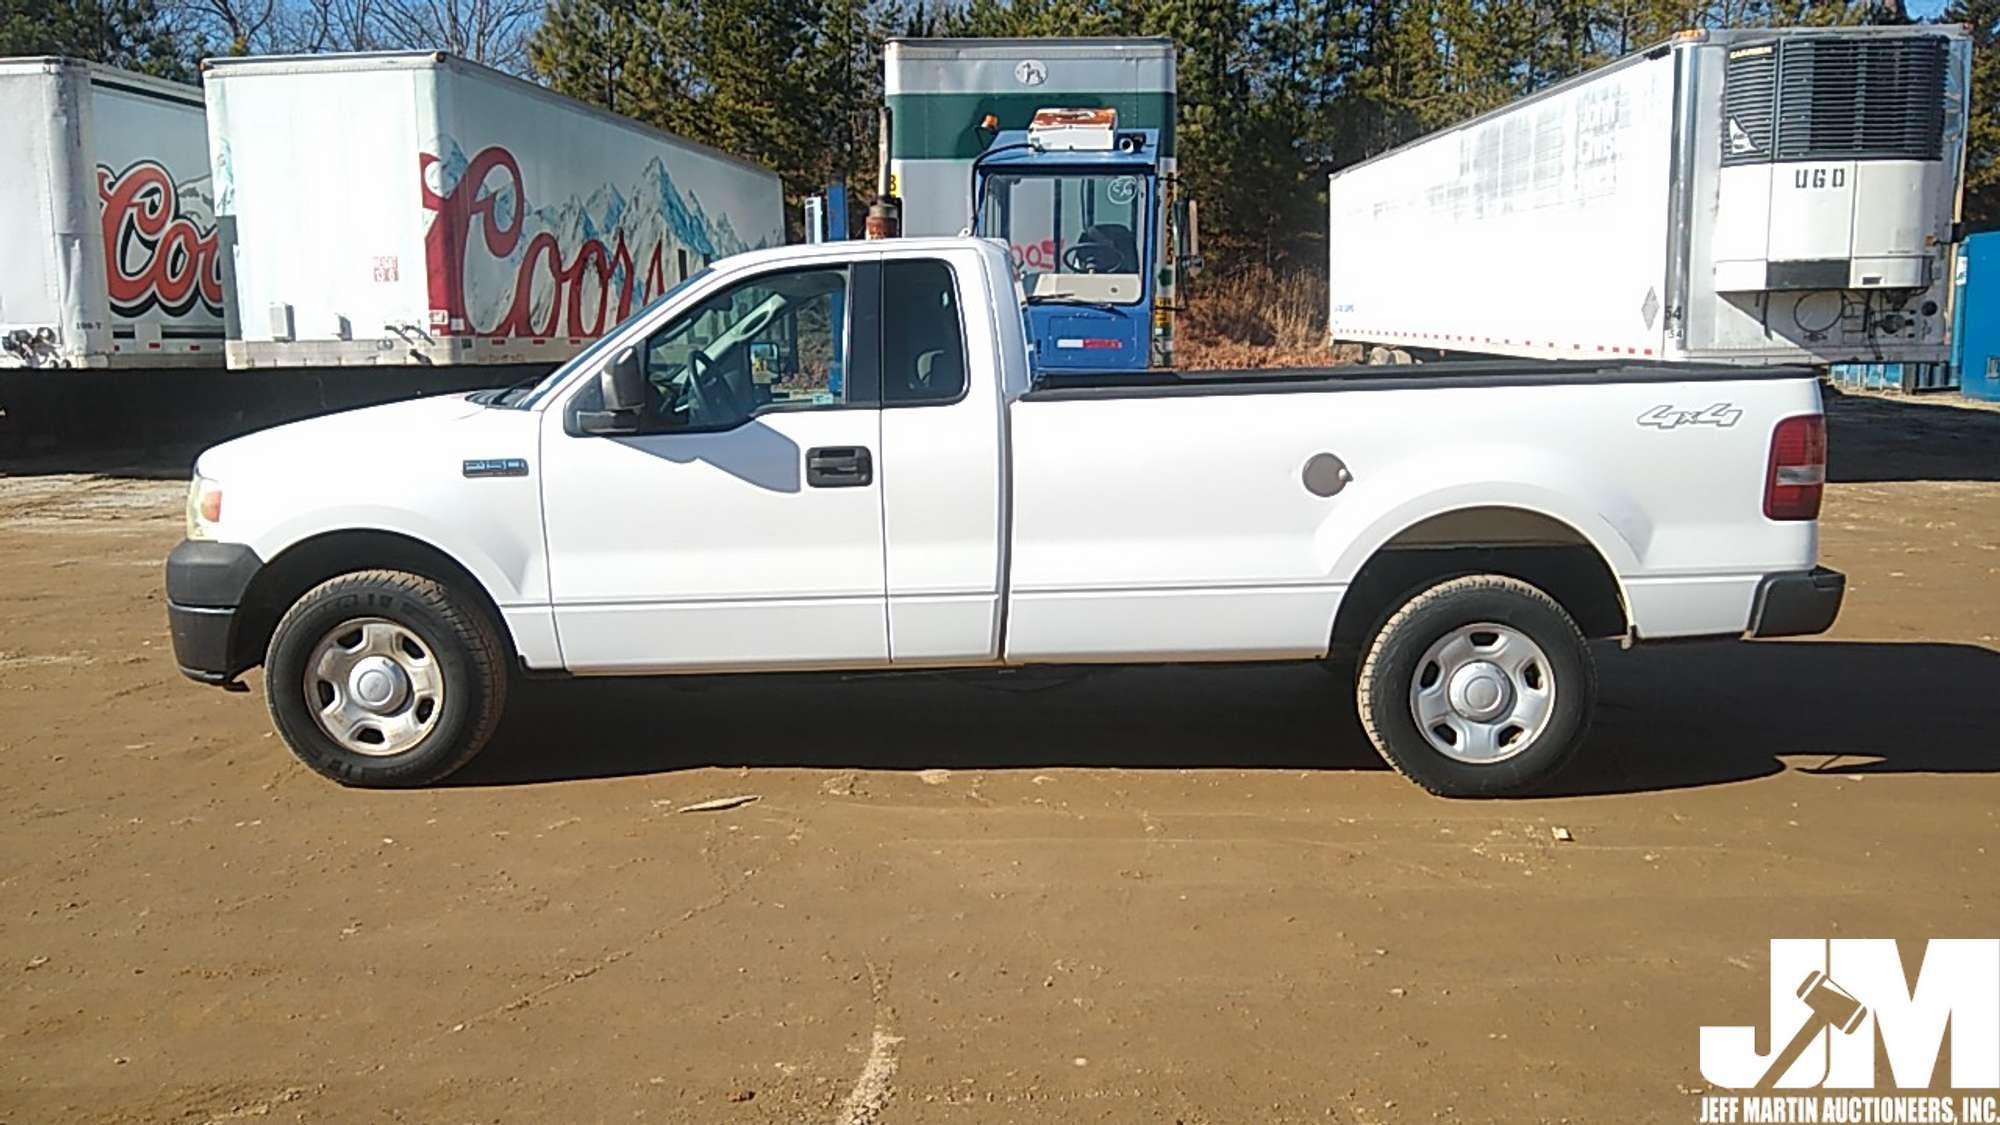 2006 FORD F-150 EXTENDED CAB 4X4 PICKUP VIN: 1FTRF14W76NB77554